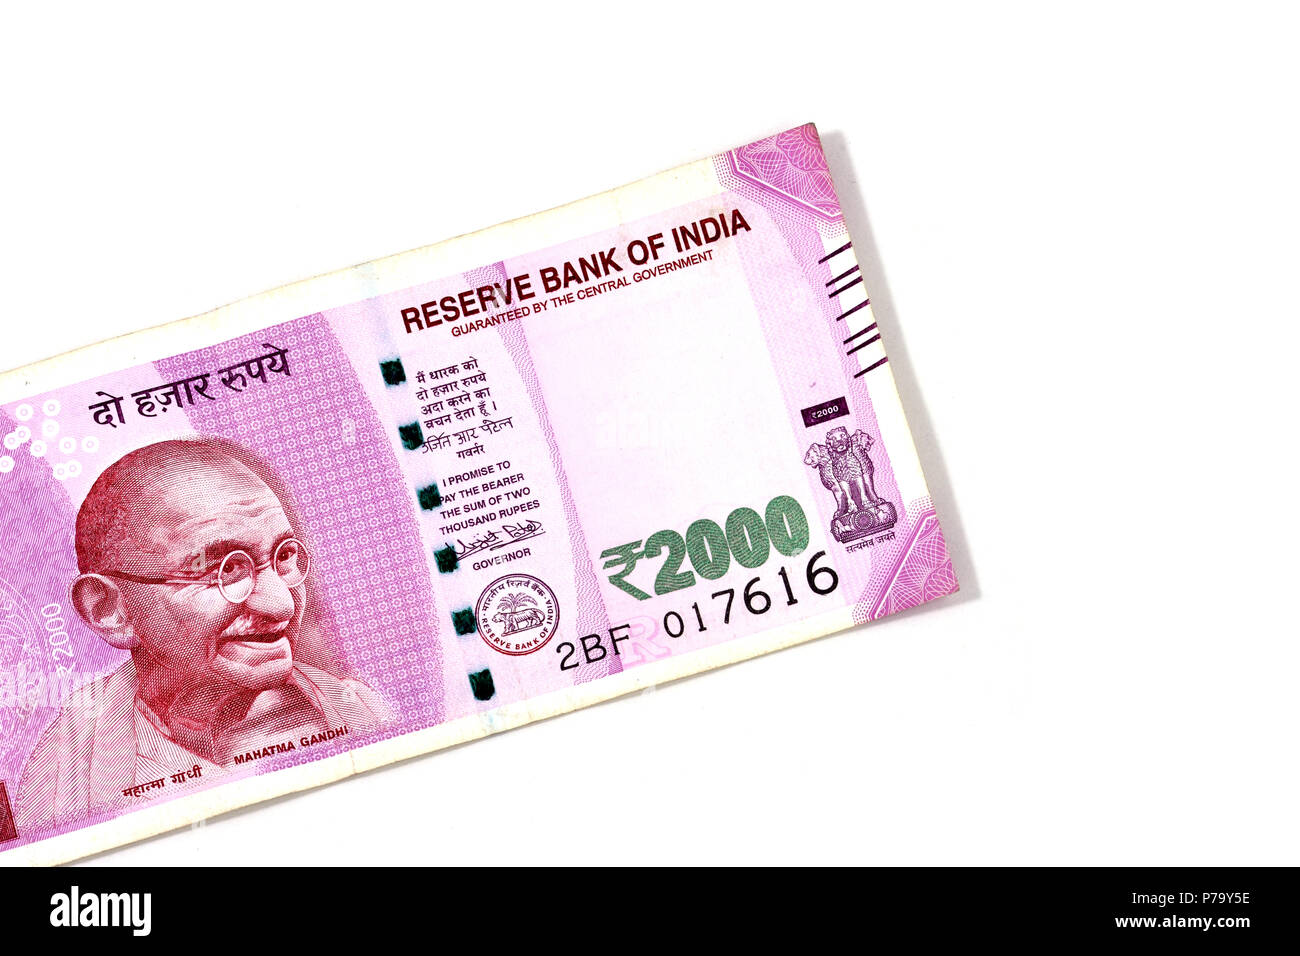 New Indian currency of 2000 rupee note Stock Photo